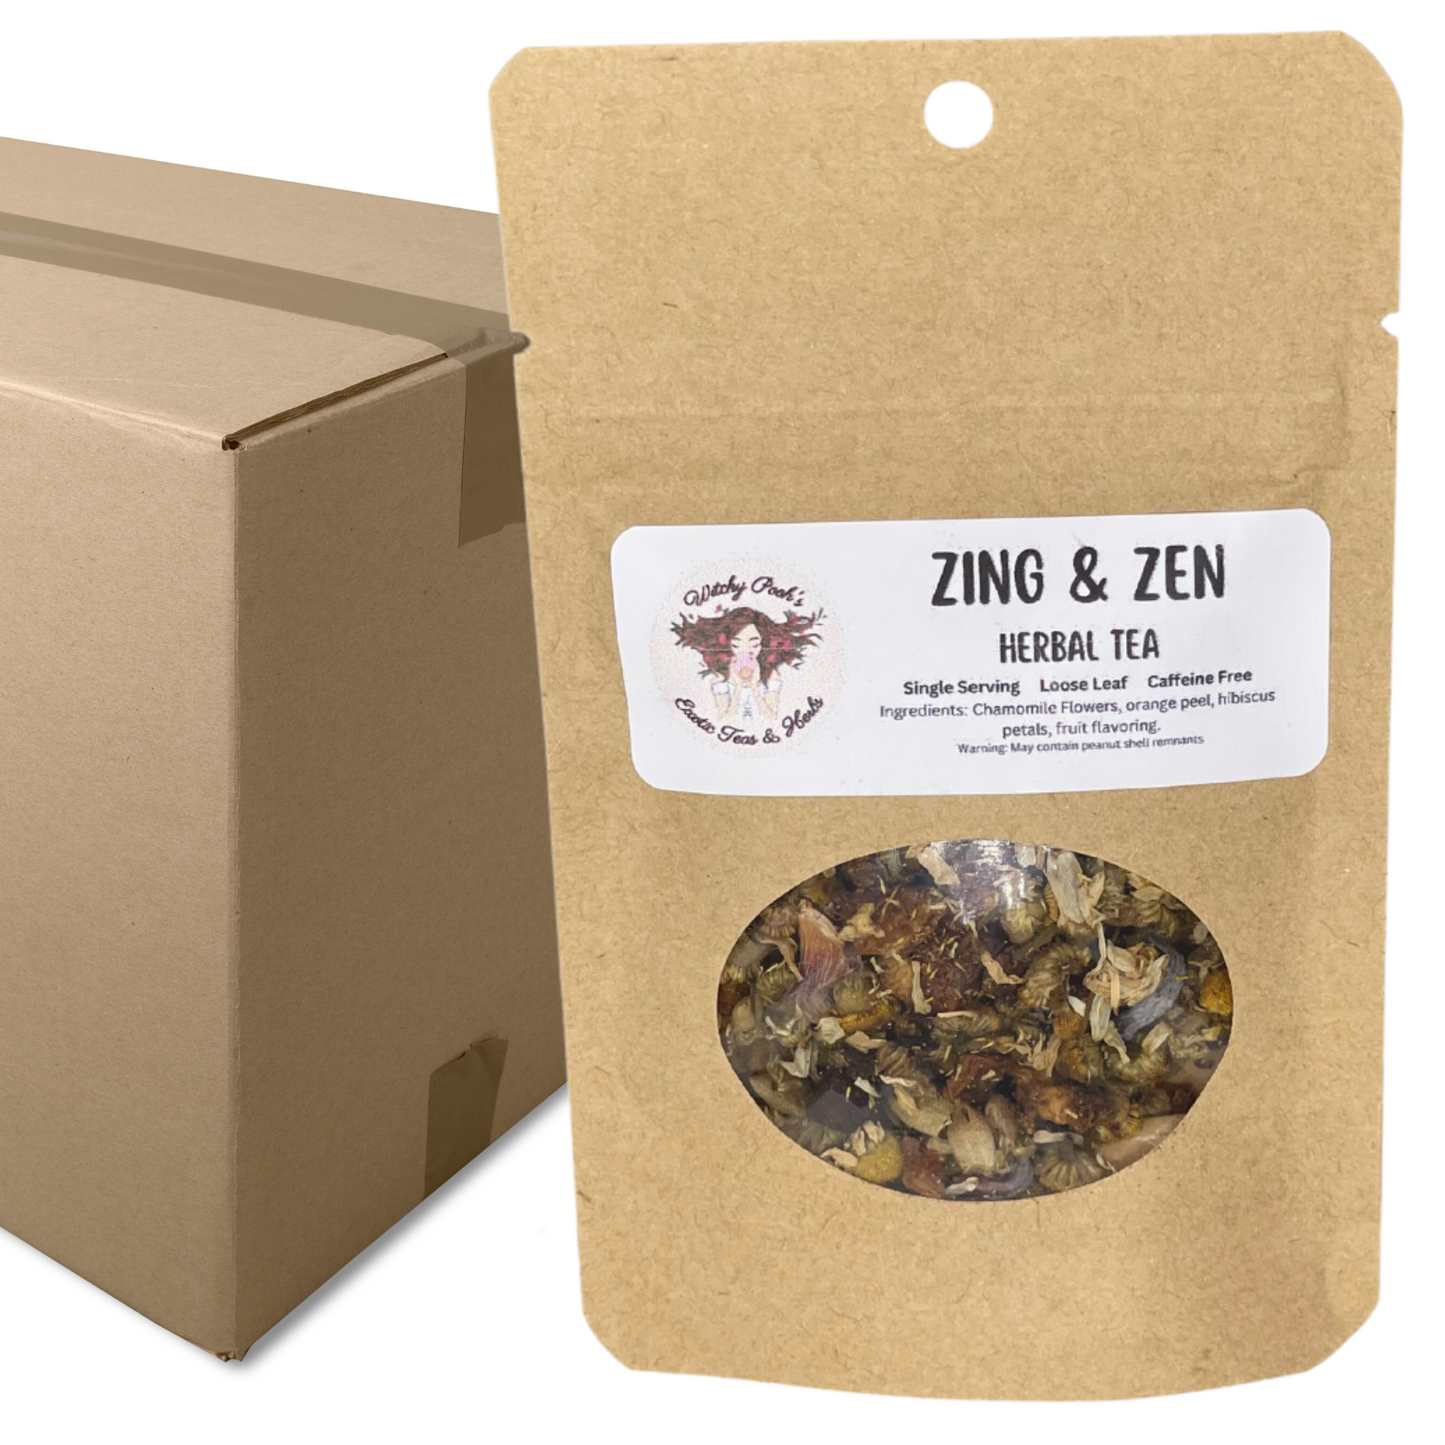 Witchy Pooh's Zing & Zen Loose Leaf Citrus Flavored Chamomile Herbal Tea, Caffeine Free-24